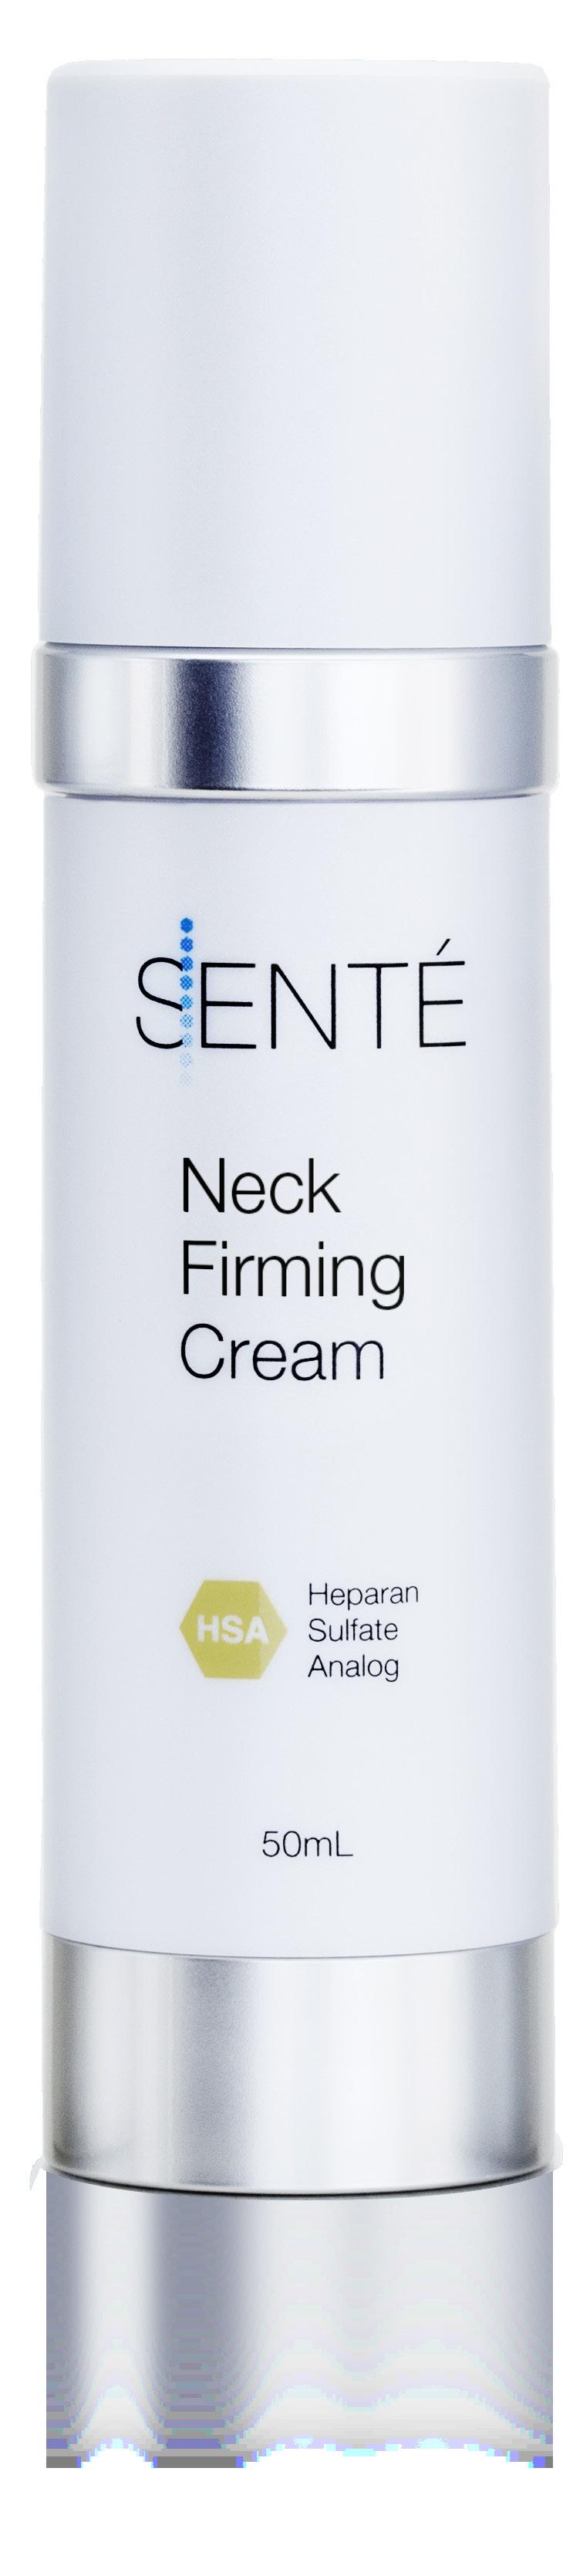 29 NECK FIRMING CREAM Engineered with and a unique blend of ingredients to lift and tighten the neck and décolletage.